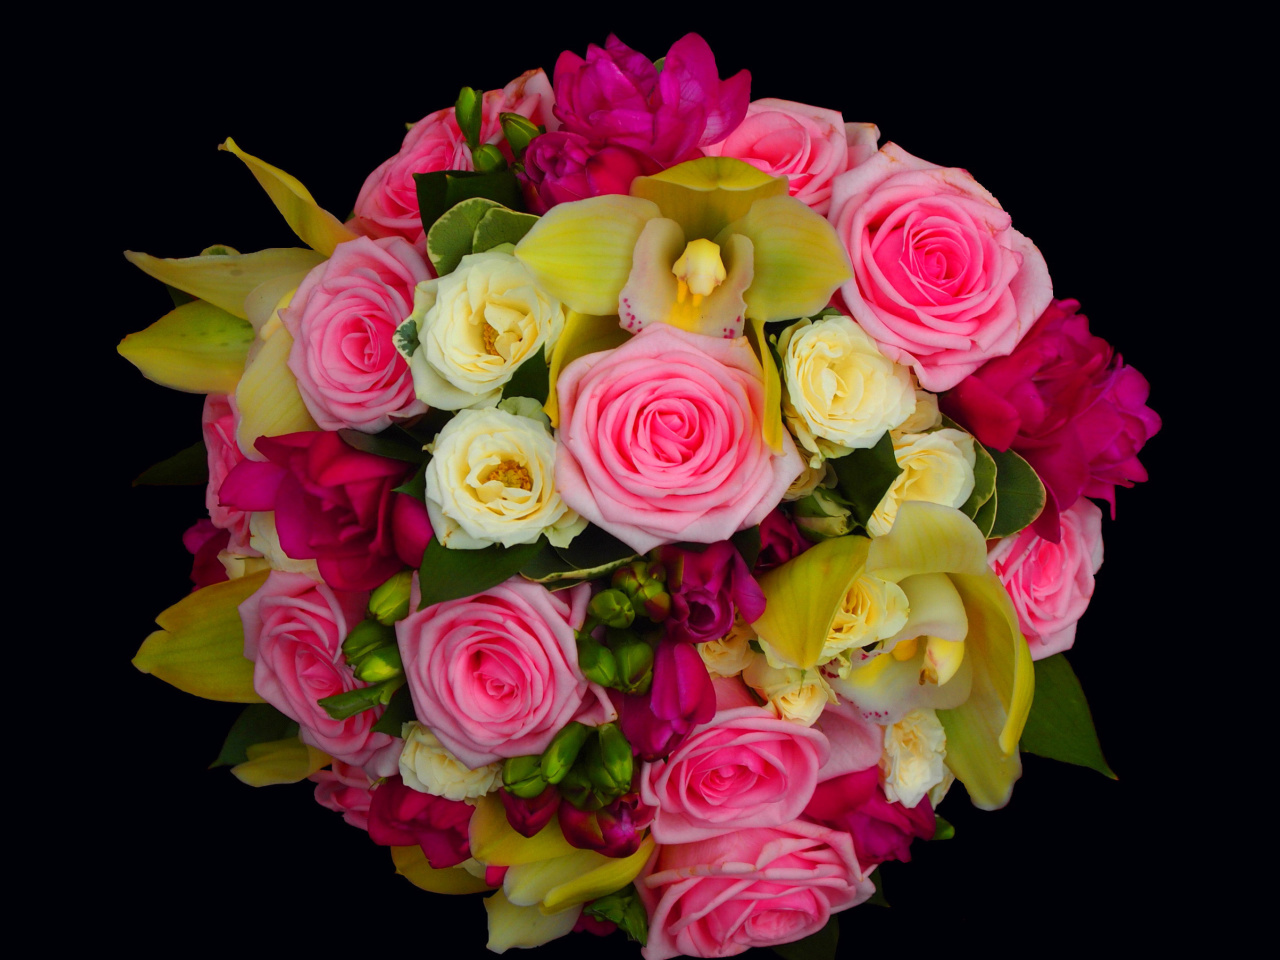 Bouquet of roses and yellow orchid, floristry screenshot #1 1280x960